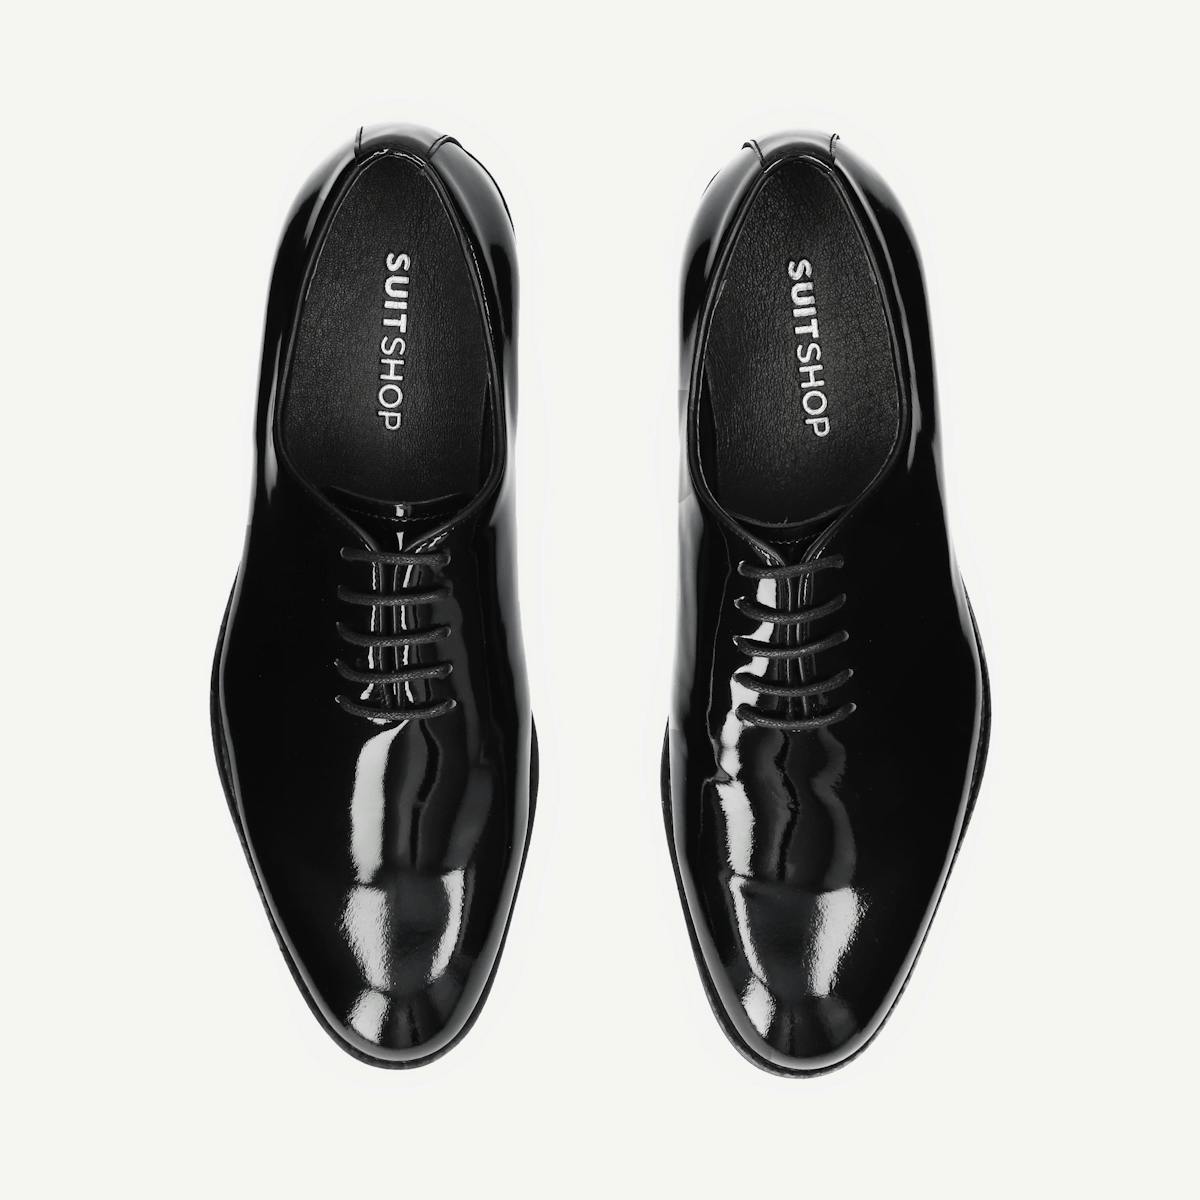 Patent leather tuxedo shoes help make an outfit festive.